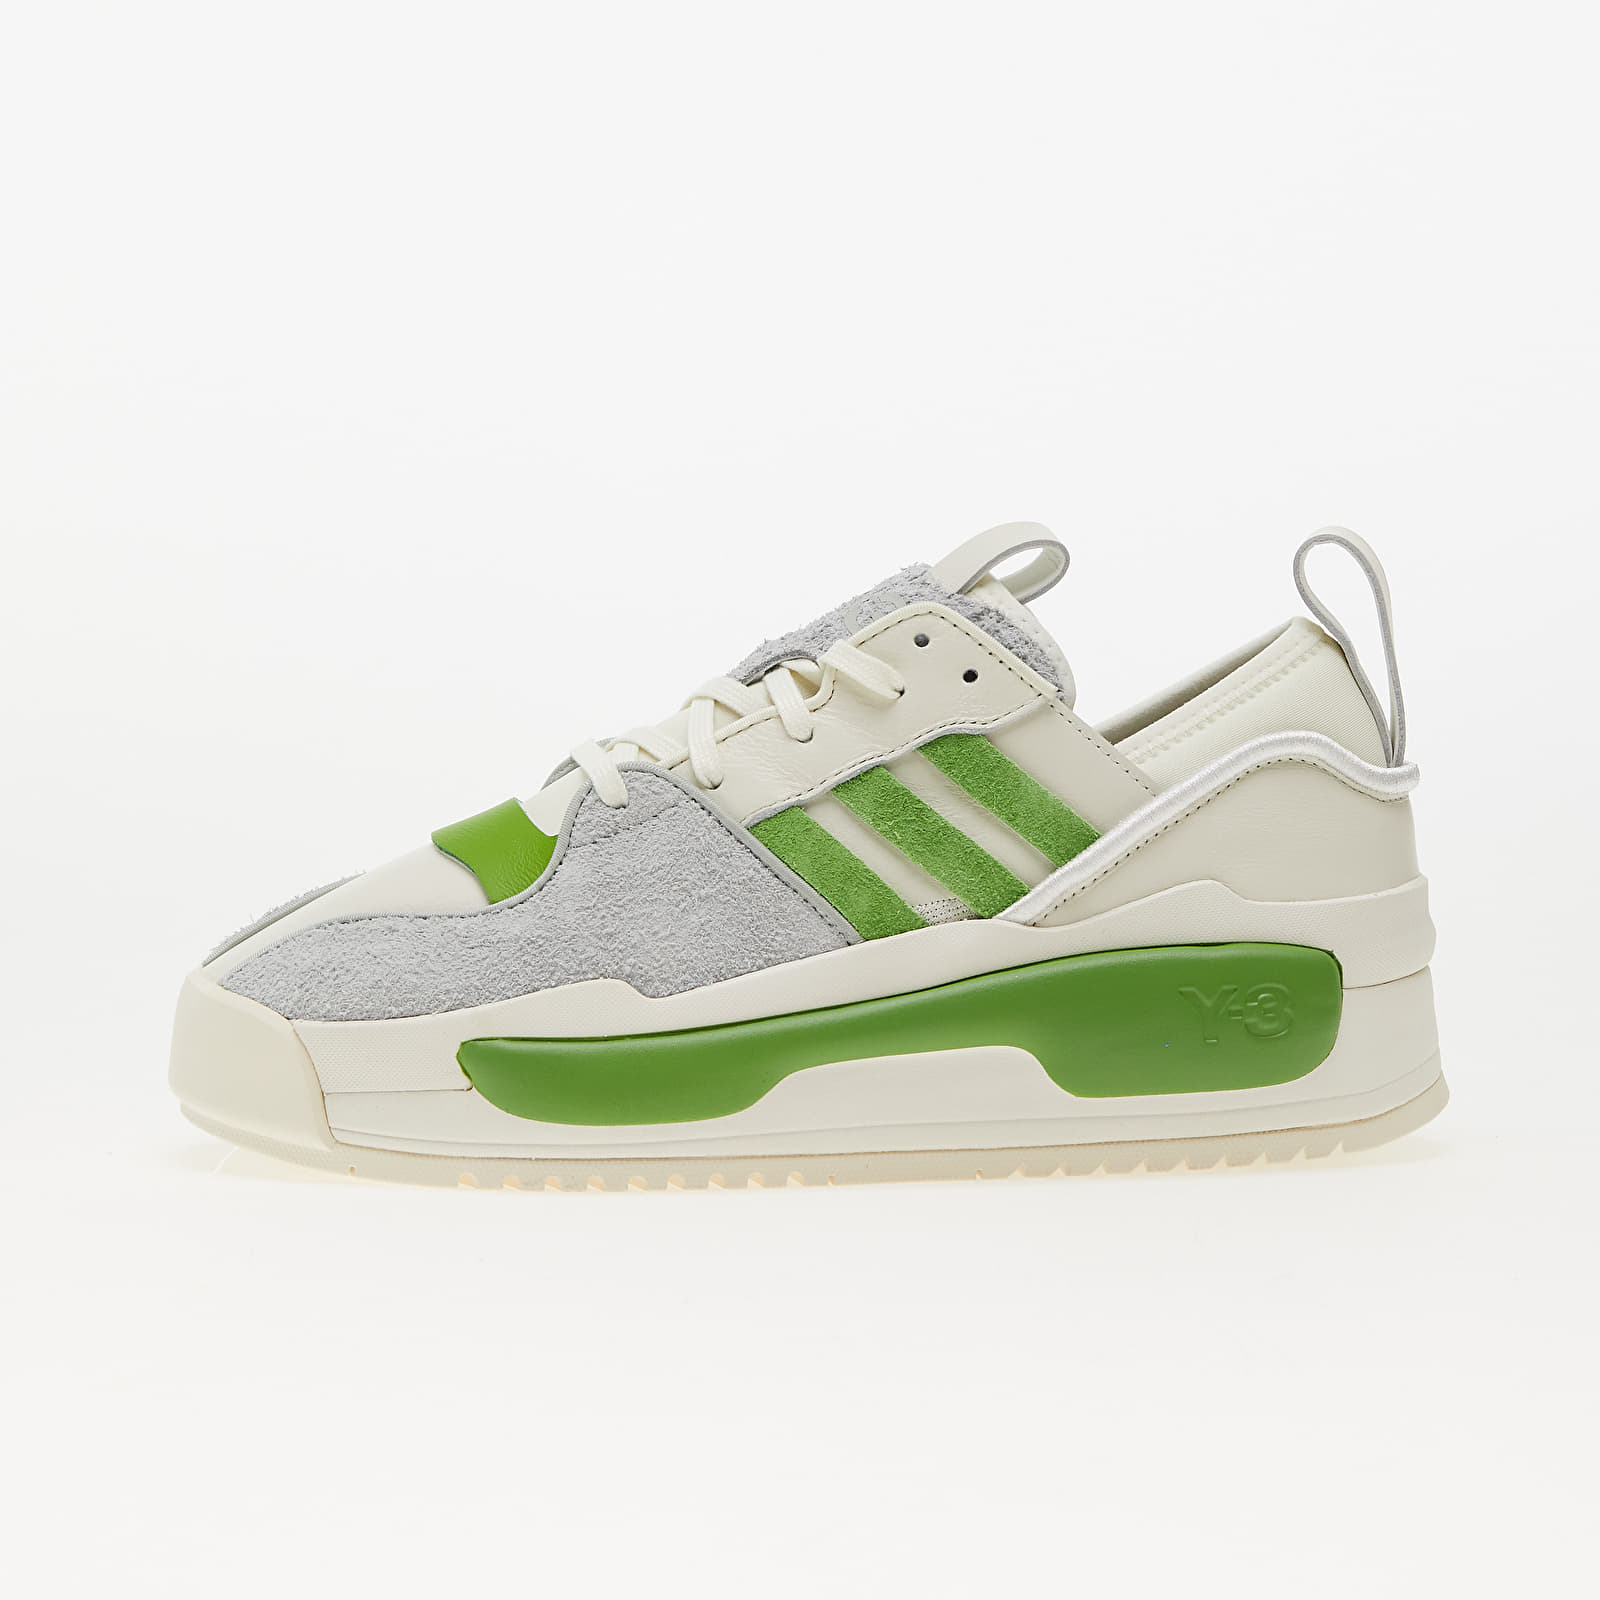 Men's shoes Y-3 Rivalry Off White / Team Rave Green / Wonder Silver